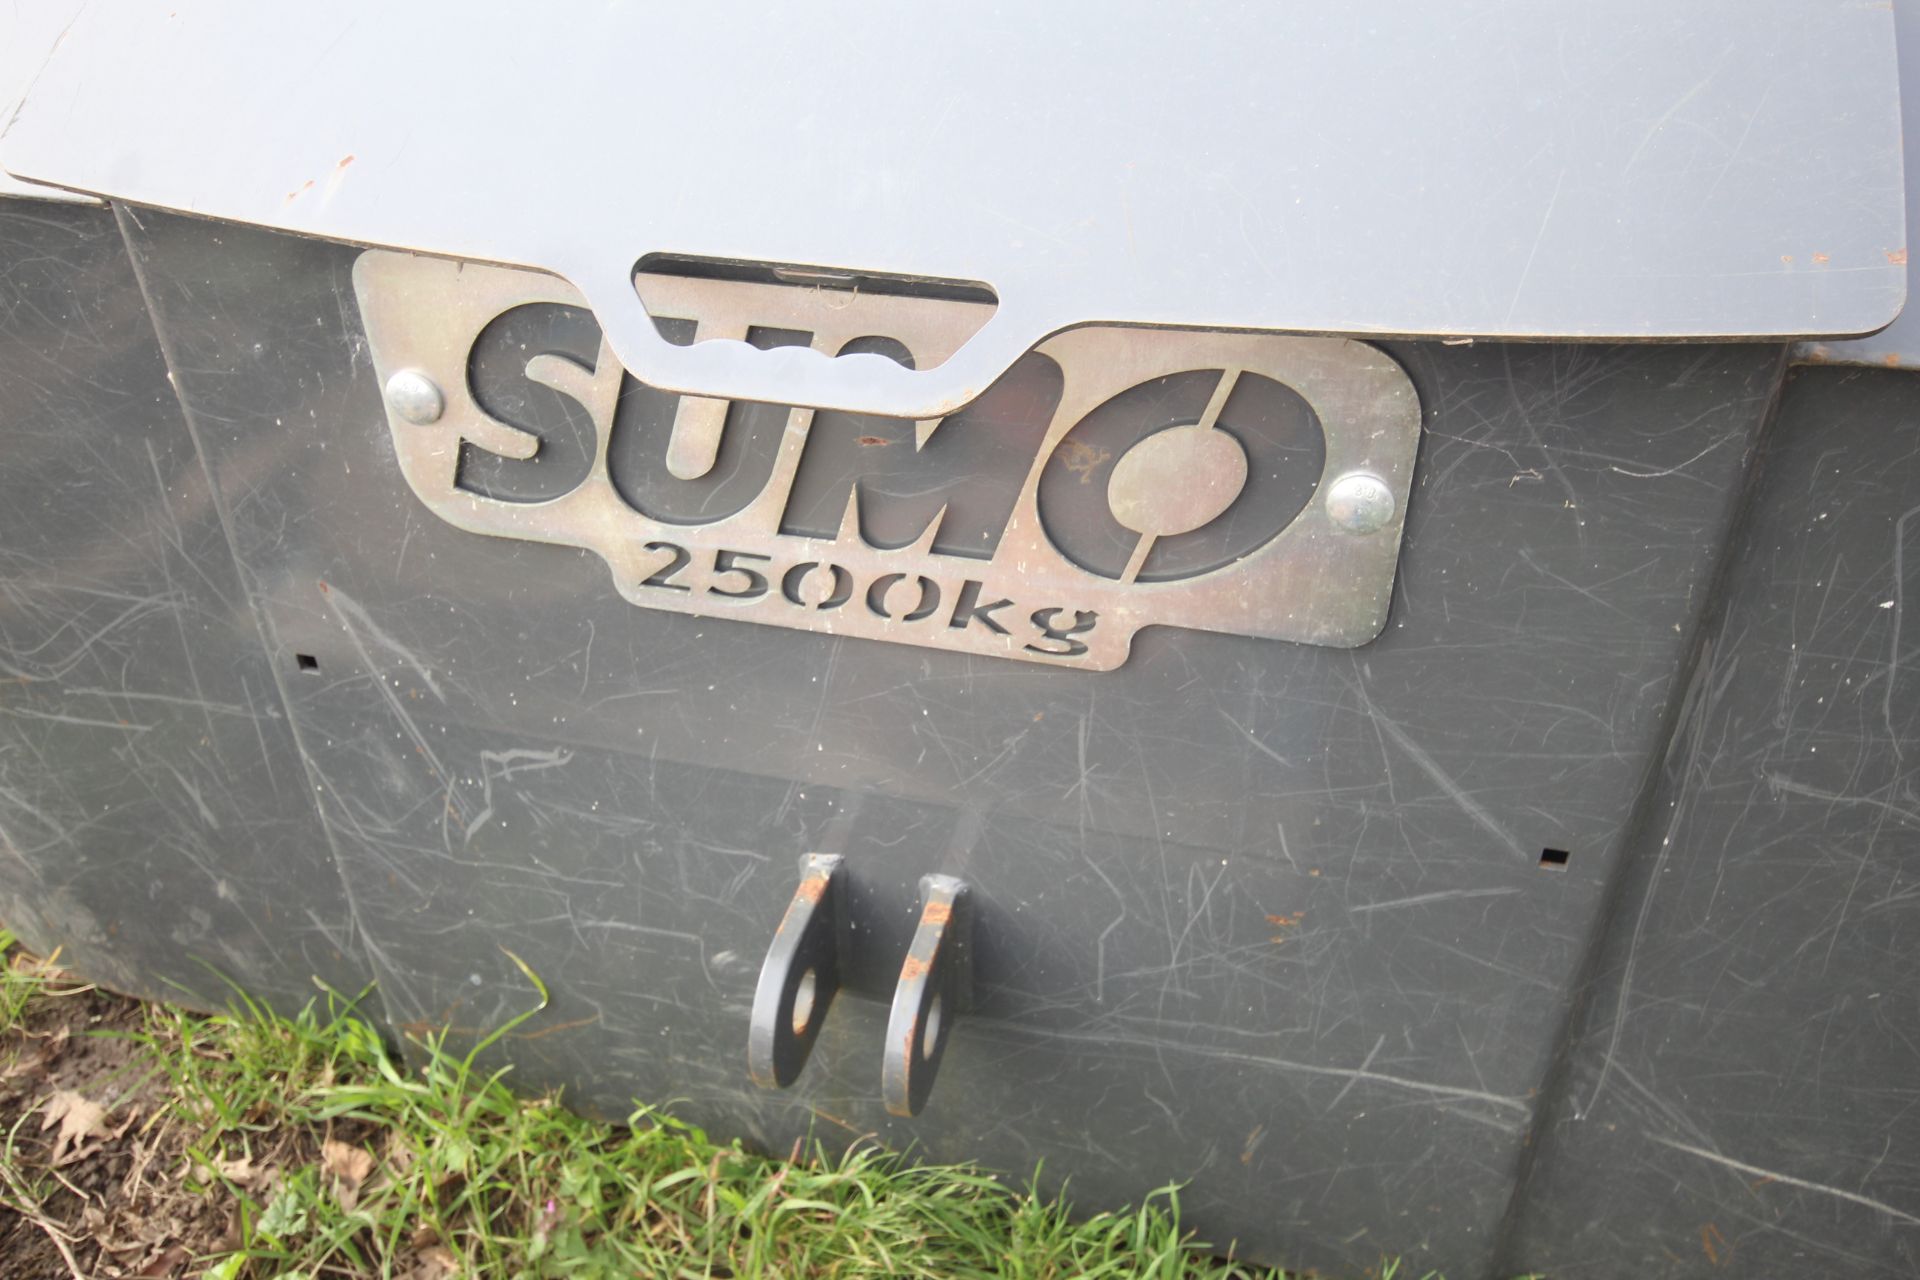 Sumo 2,500kg front linkage weight block. With toolbox. Serial number AE147. V - Image 13 of 15